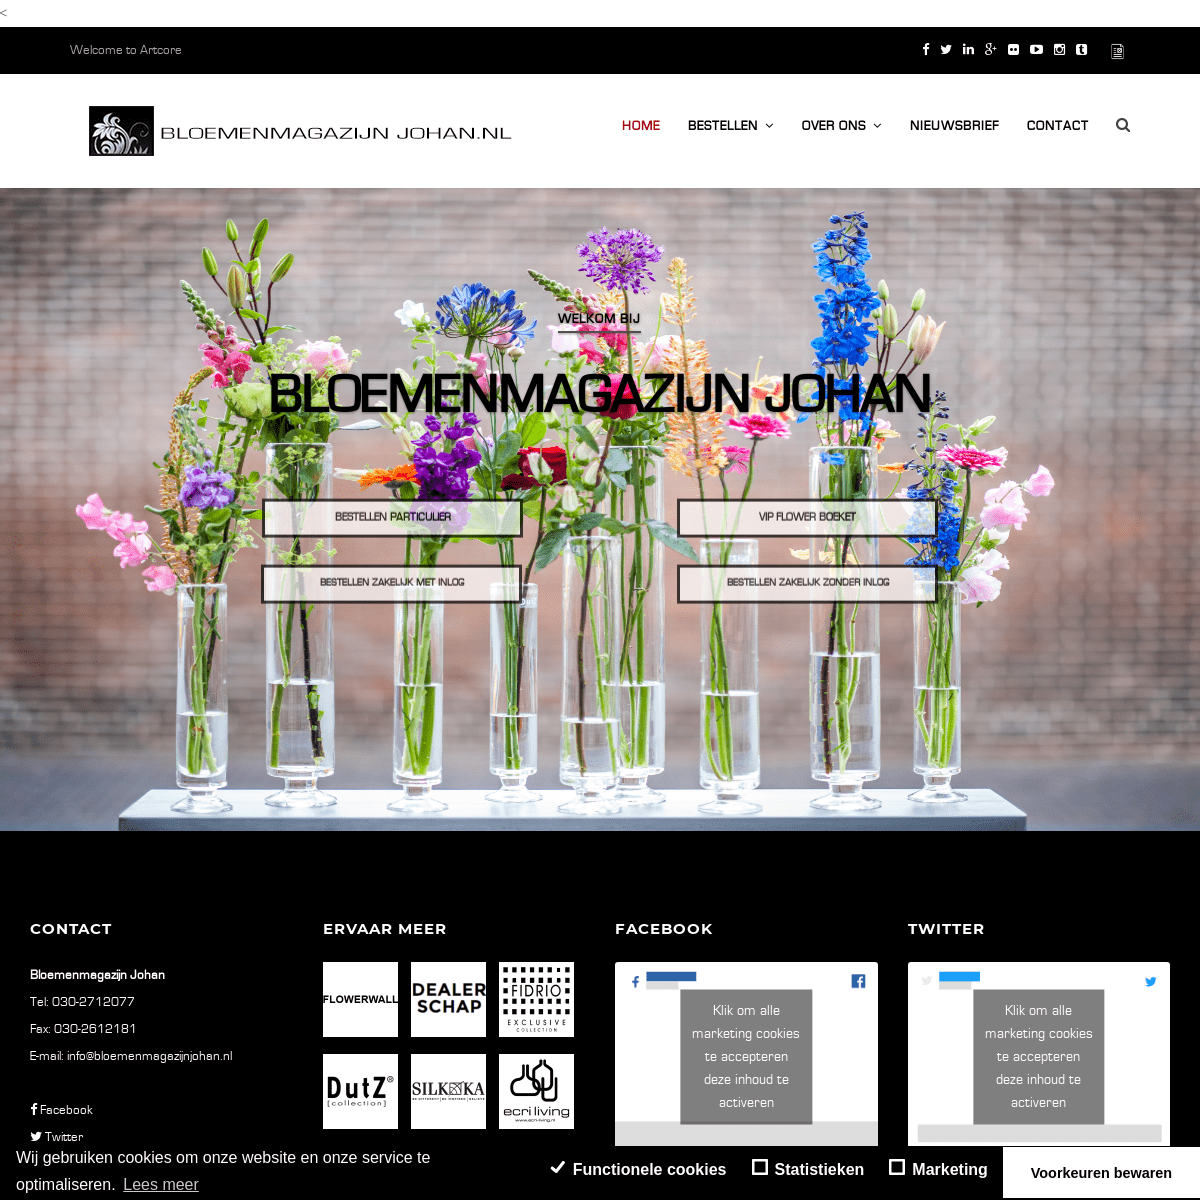 A complete backup of bloemenmagazijnjohan.nl